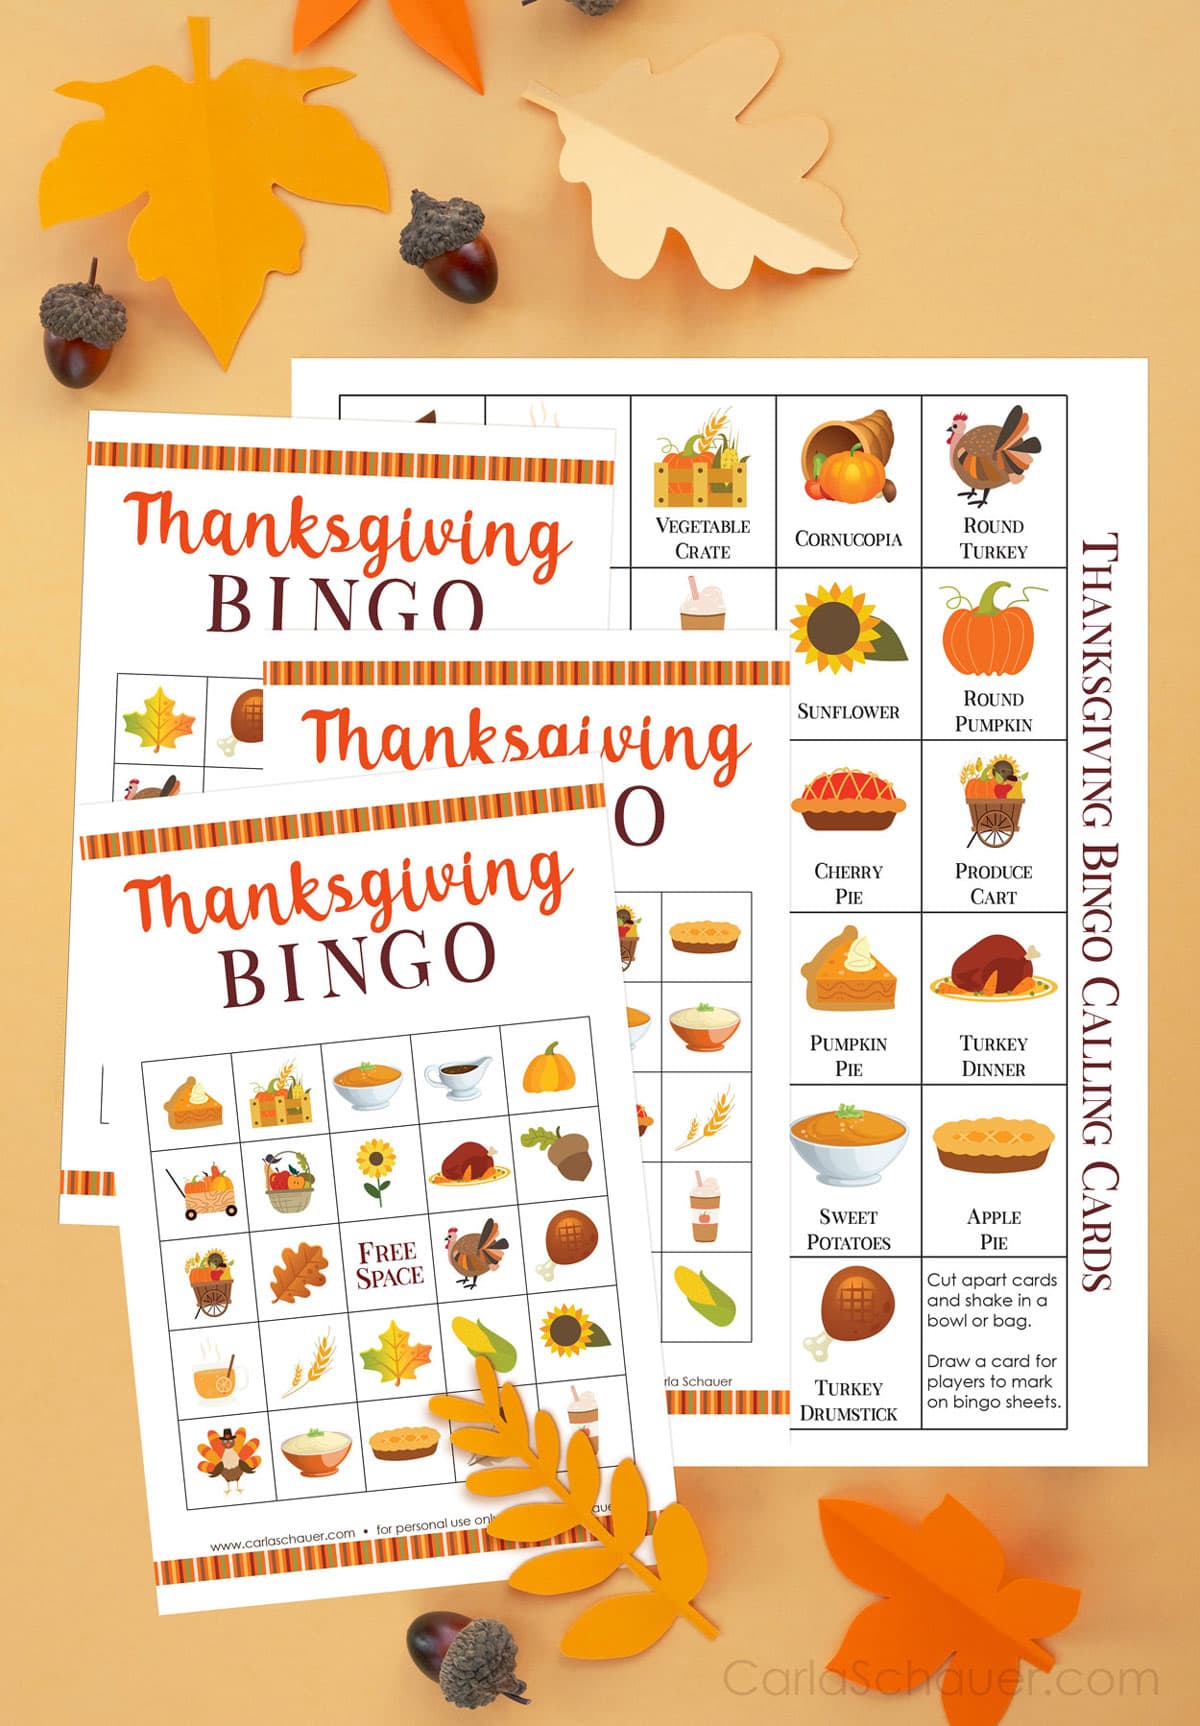 3 Thanksgiving bingo cards and 1 calling card printed pages with colorful fall icons. Printed pages are lying on a pale orange background with fall leaf paper cutouts and acorns.